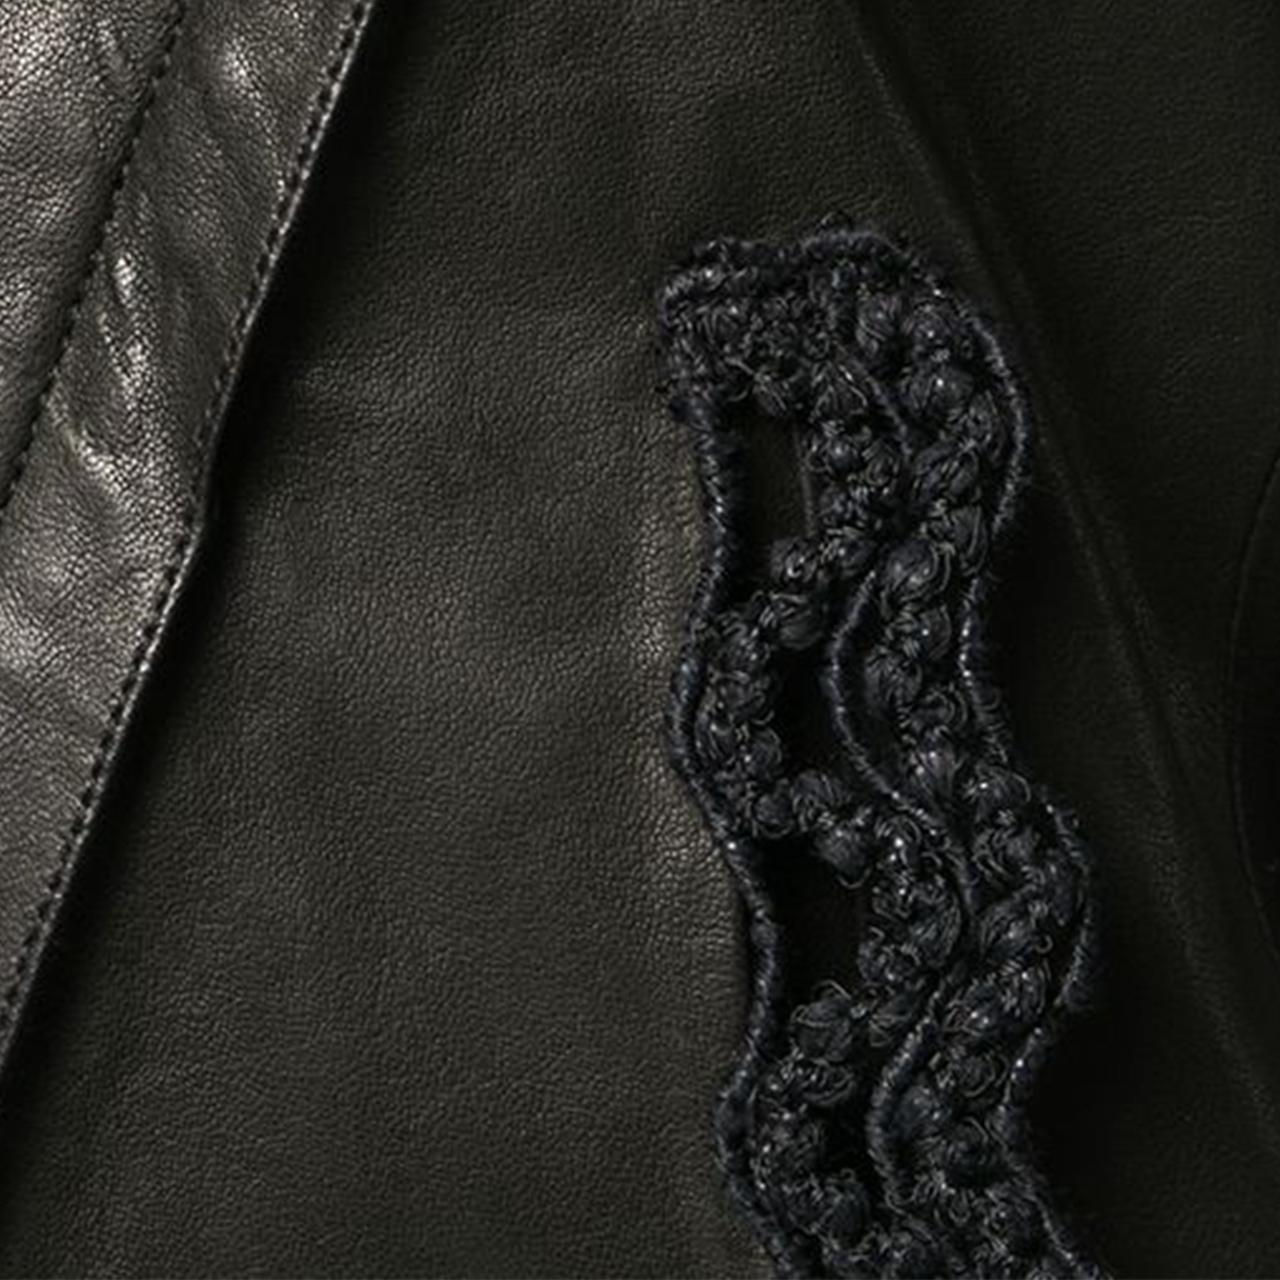 Expertly cut and crafted from smooth black lambskin and a delightful silk lining, this long sleeved biker jacket features a cropped length and the distinct, modern design of crochet trim detailing around the wide lapel. The off-centre front zip